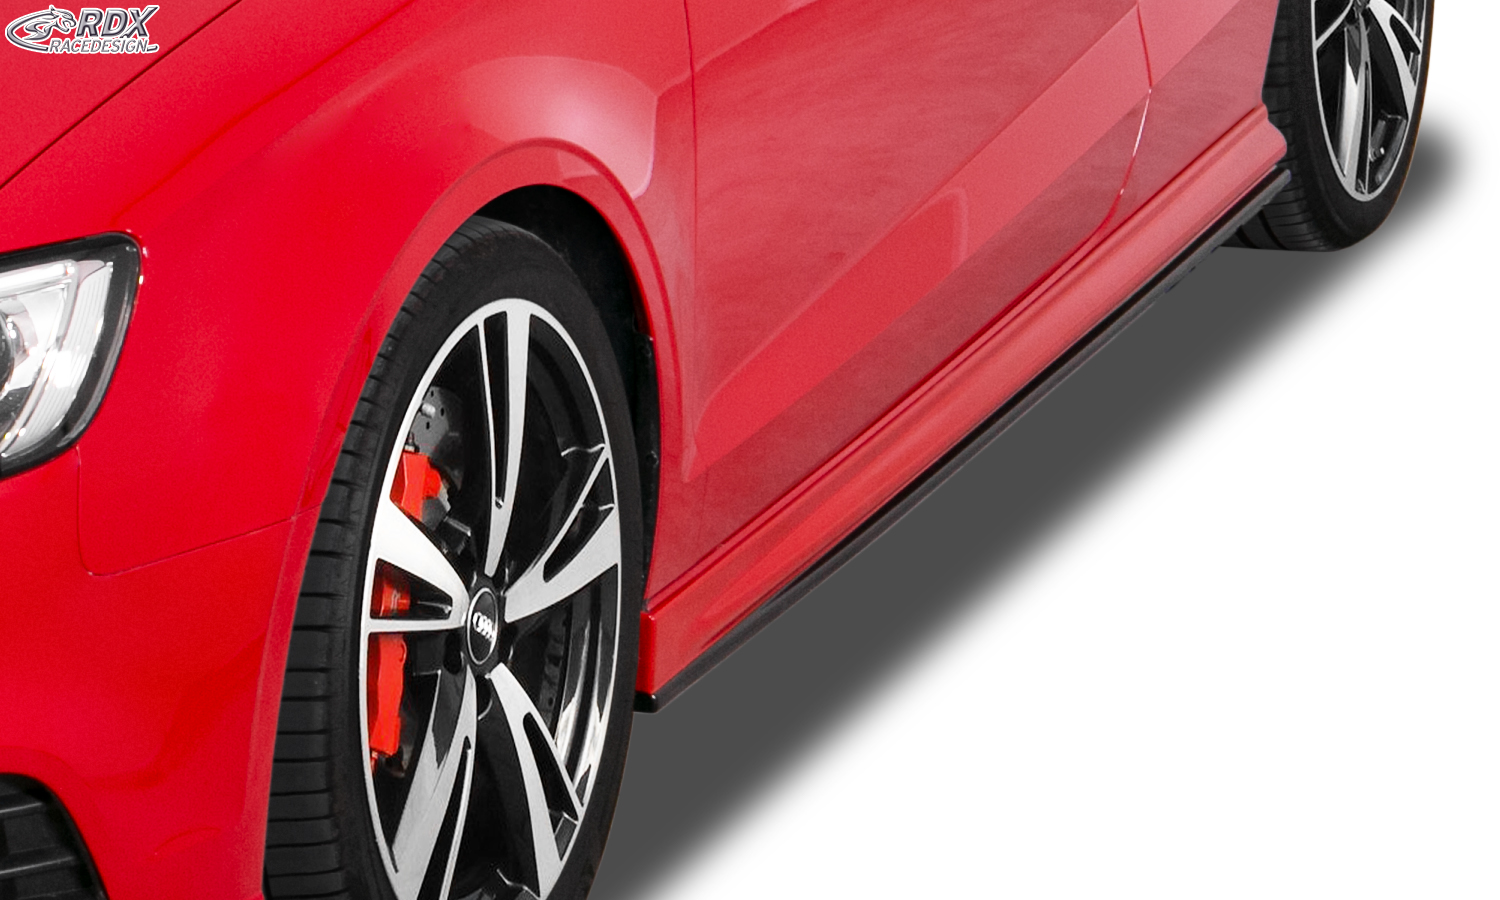 RDX Sideskirts for AUDI A3 8V7 Cabrio Convertible "Edition" 